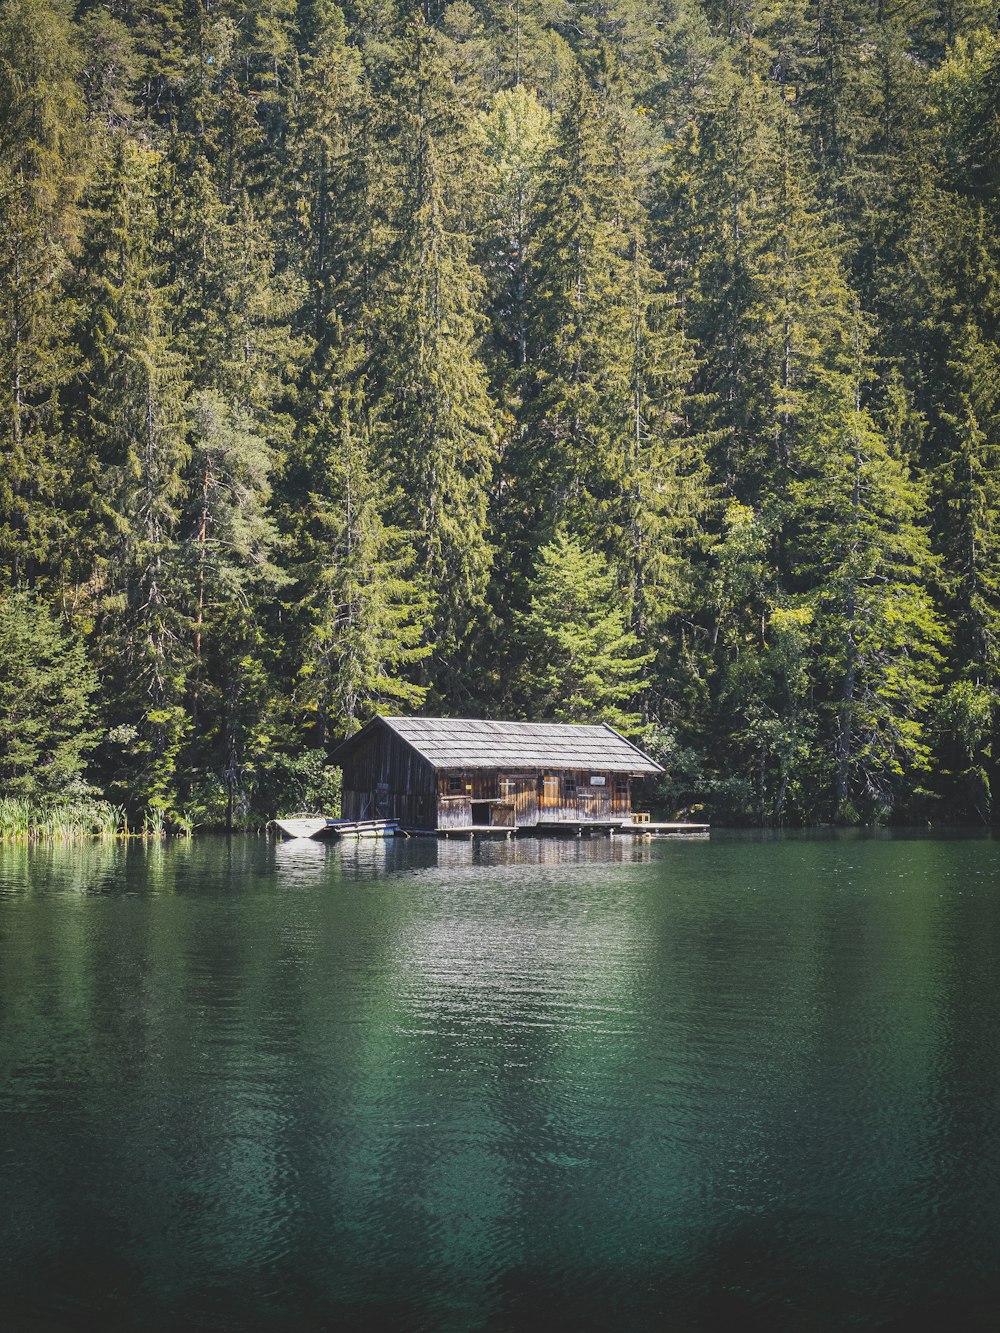 brown wooden house on lake near green trees during daytime